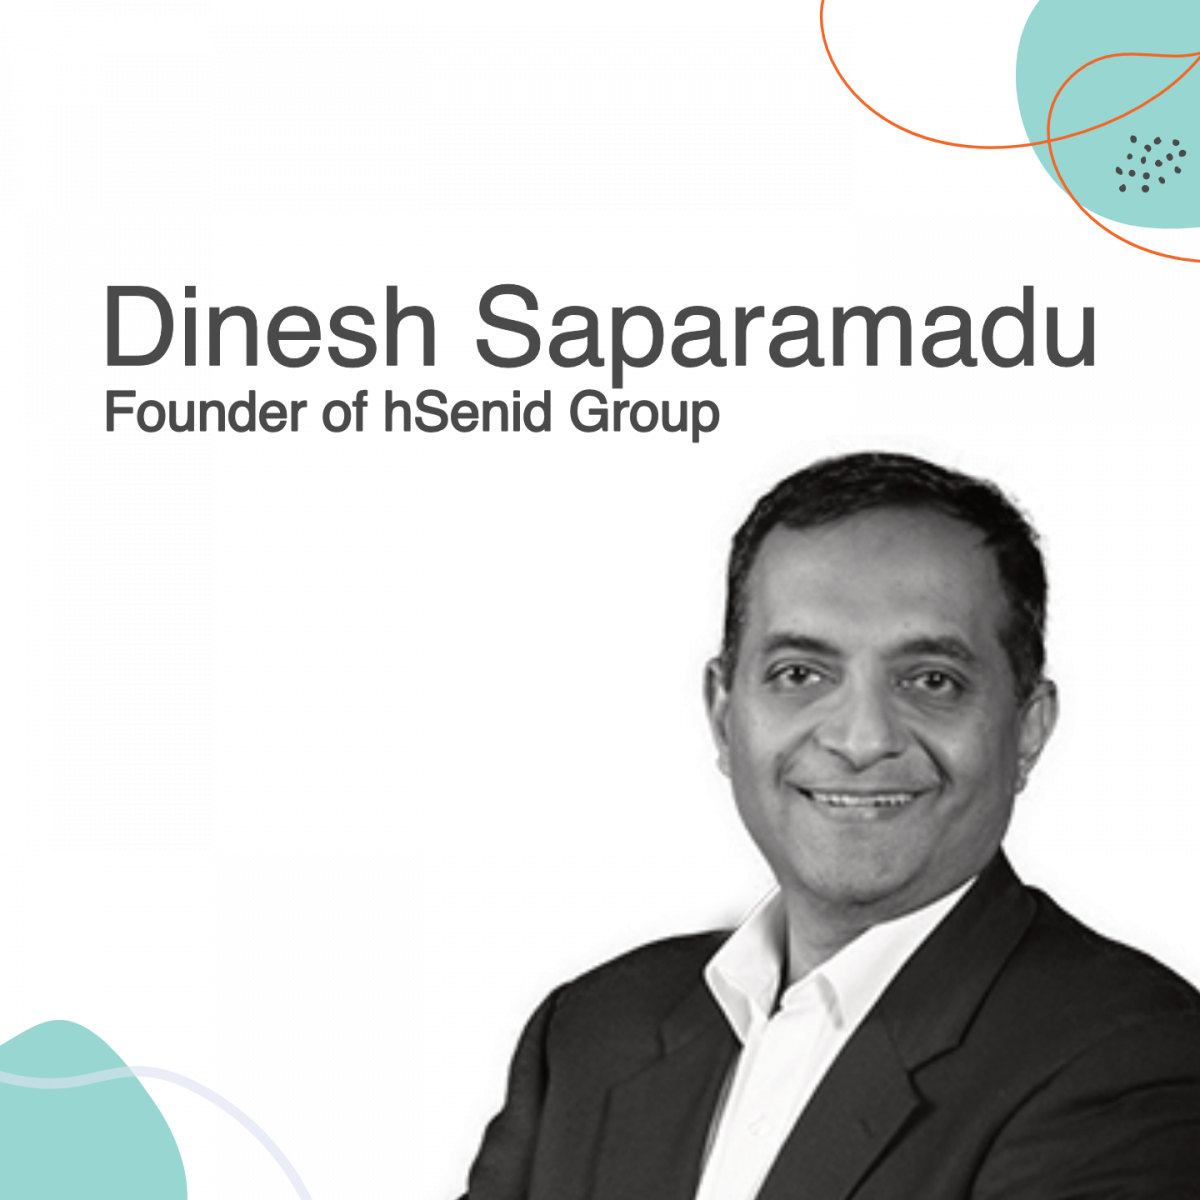 S02E02

In this episode, host Tolga catches up with Dinesh Saparamadu, founder of the hSenid Group of Companies, whom Tolga worked with during the 2008 global financial crisis...